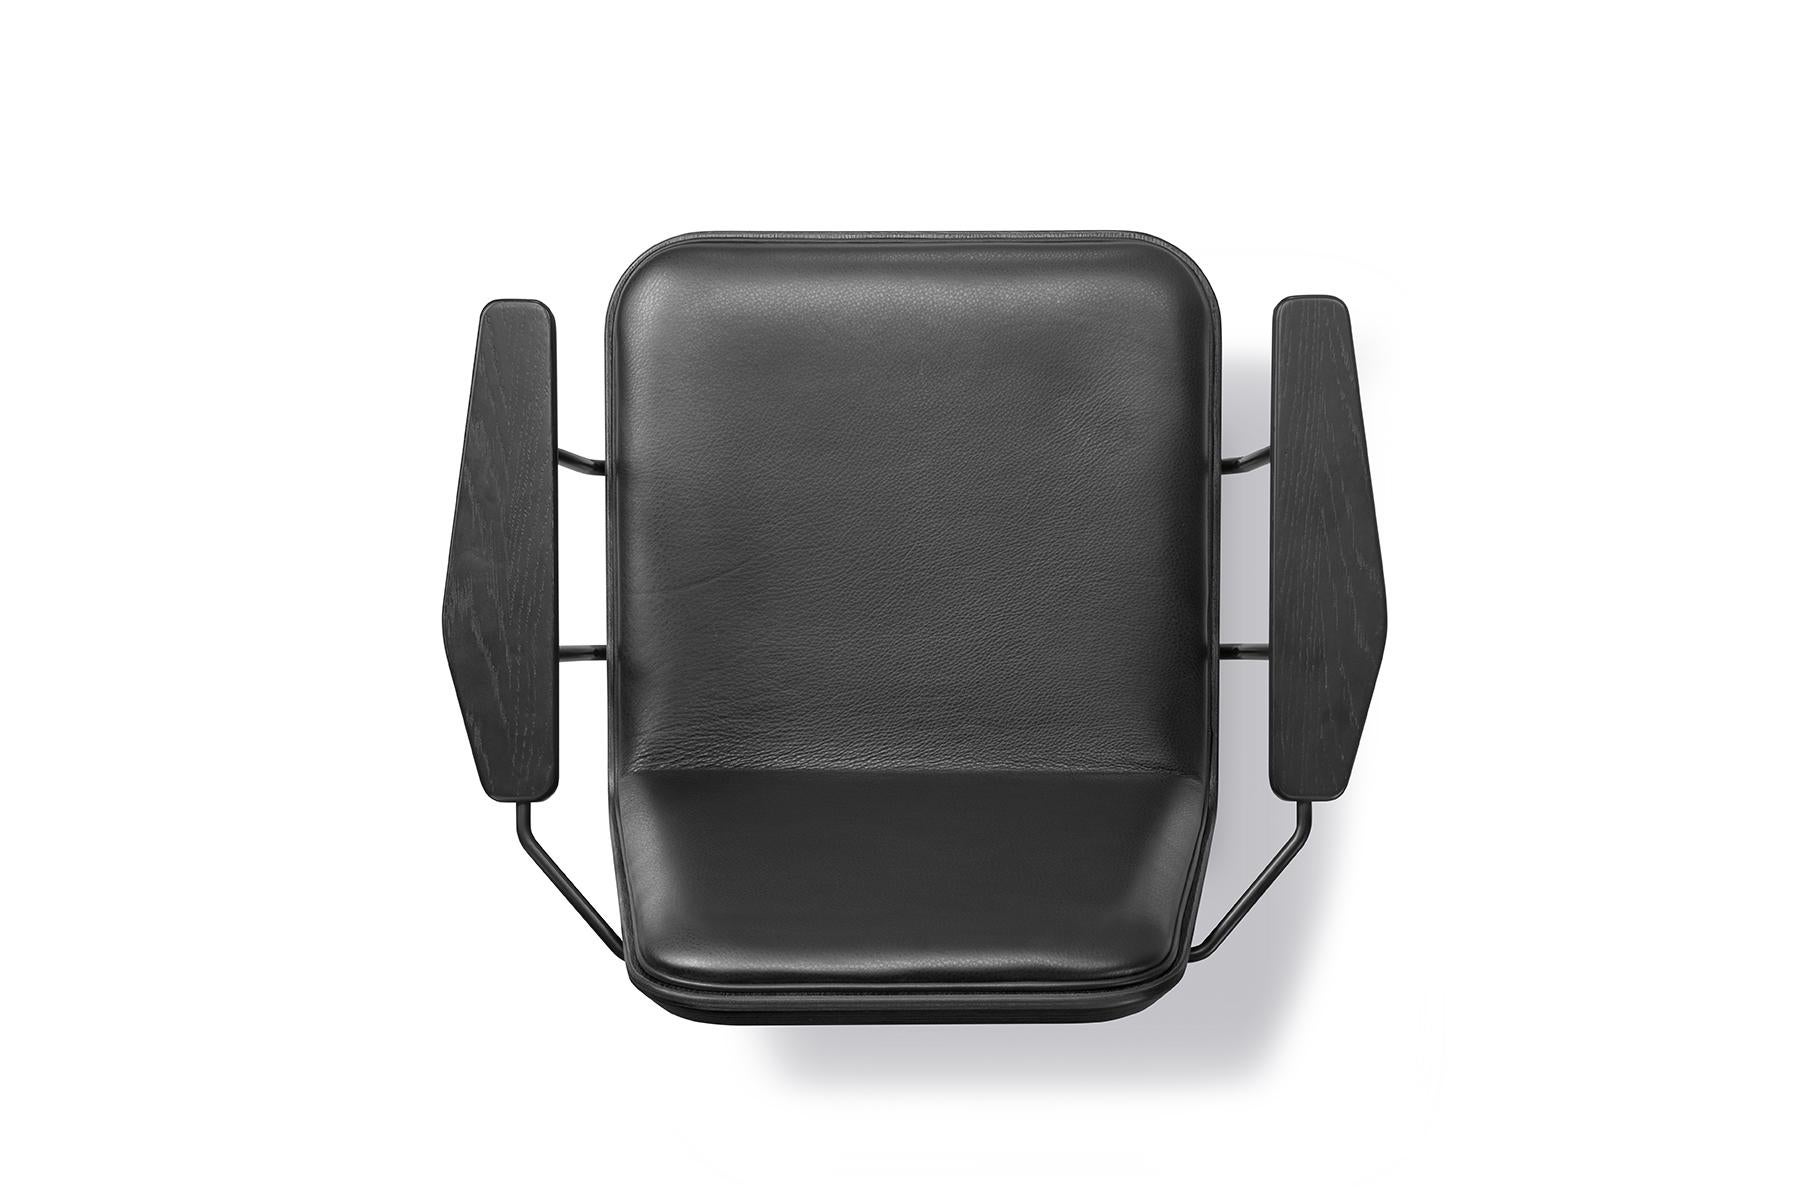 Space Copenhagen spine armchair, wood base is the fusion of Fredericia’s craft traditions and Space Copenhagen’s dynamic visual language that uses both Classic motifs and unorthodox details. Designed as a luxurious dining chair for both public space